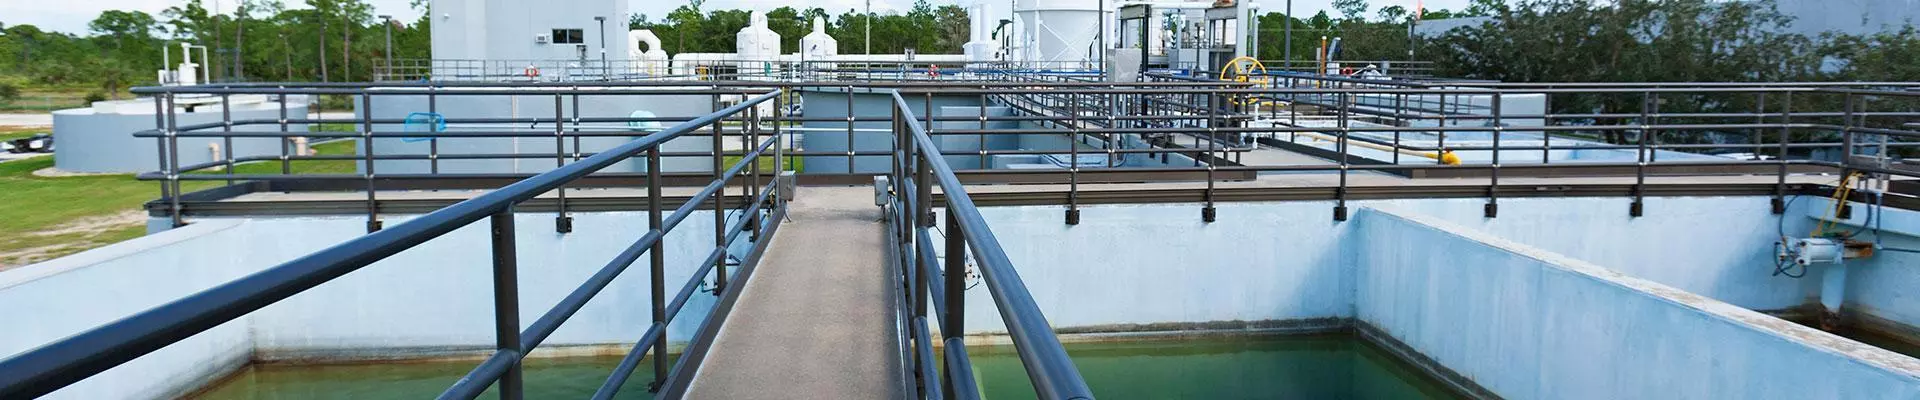 Sustainable energy solutions for water utilities